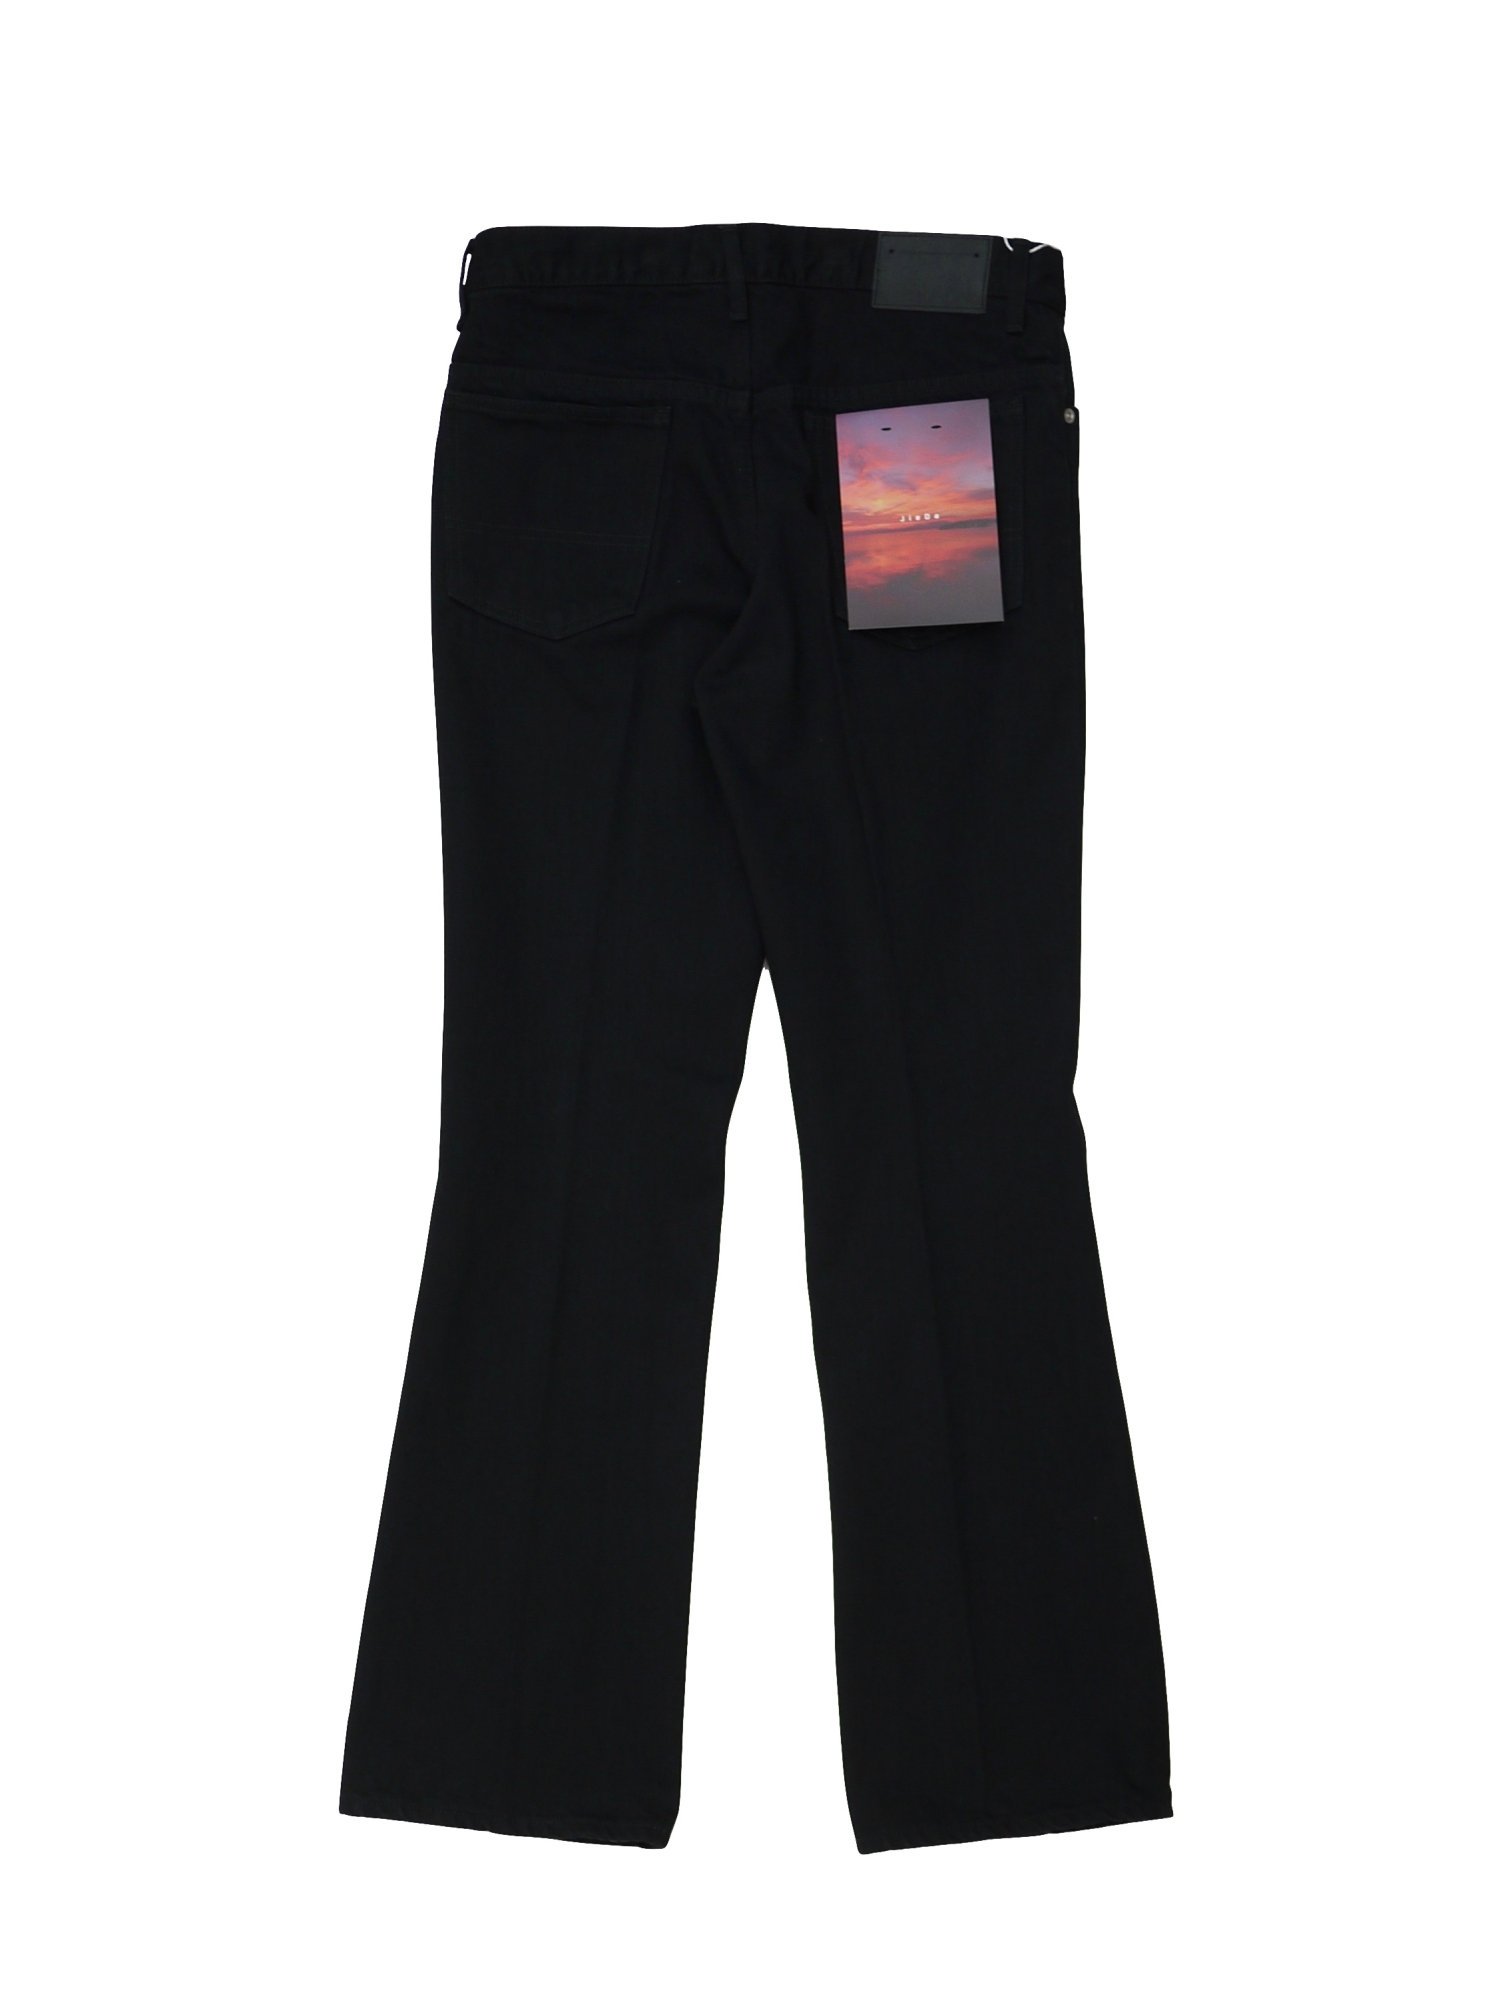 JieDa<br />OW FLARE DENIM PANTS / BLACK<img class='new_mark_img2' src='https://img.shop-pro.jp/img/new/icons14.gif' style='border:none;display:inline;margin:0px;padding:0px;width:auto;' />